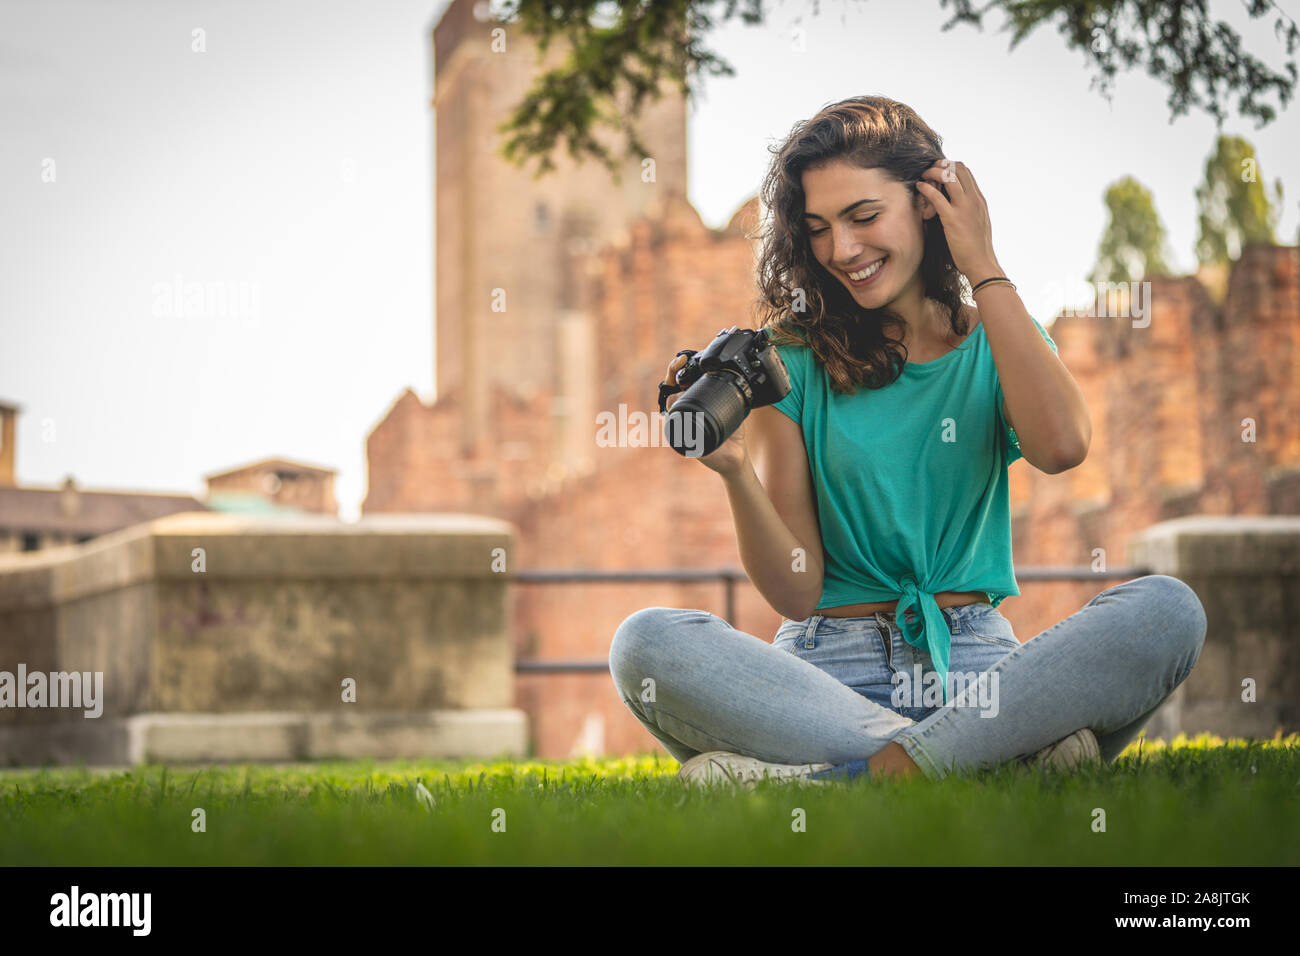 Photographer girl sitting on the grass looking at the camera screen, smiling Stock Photo